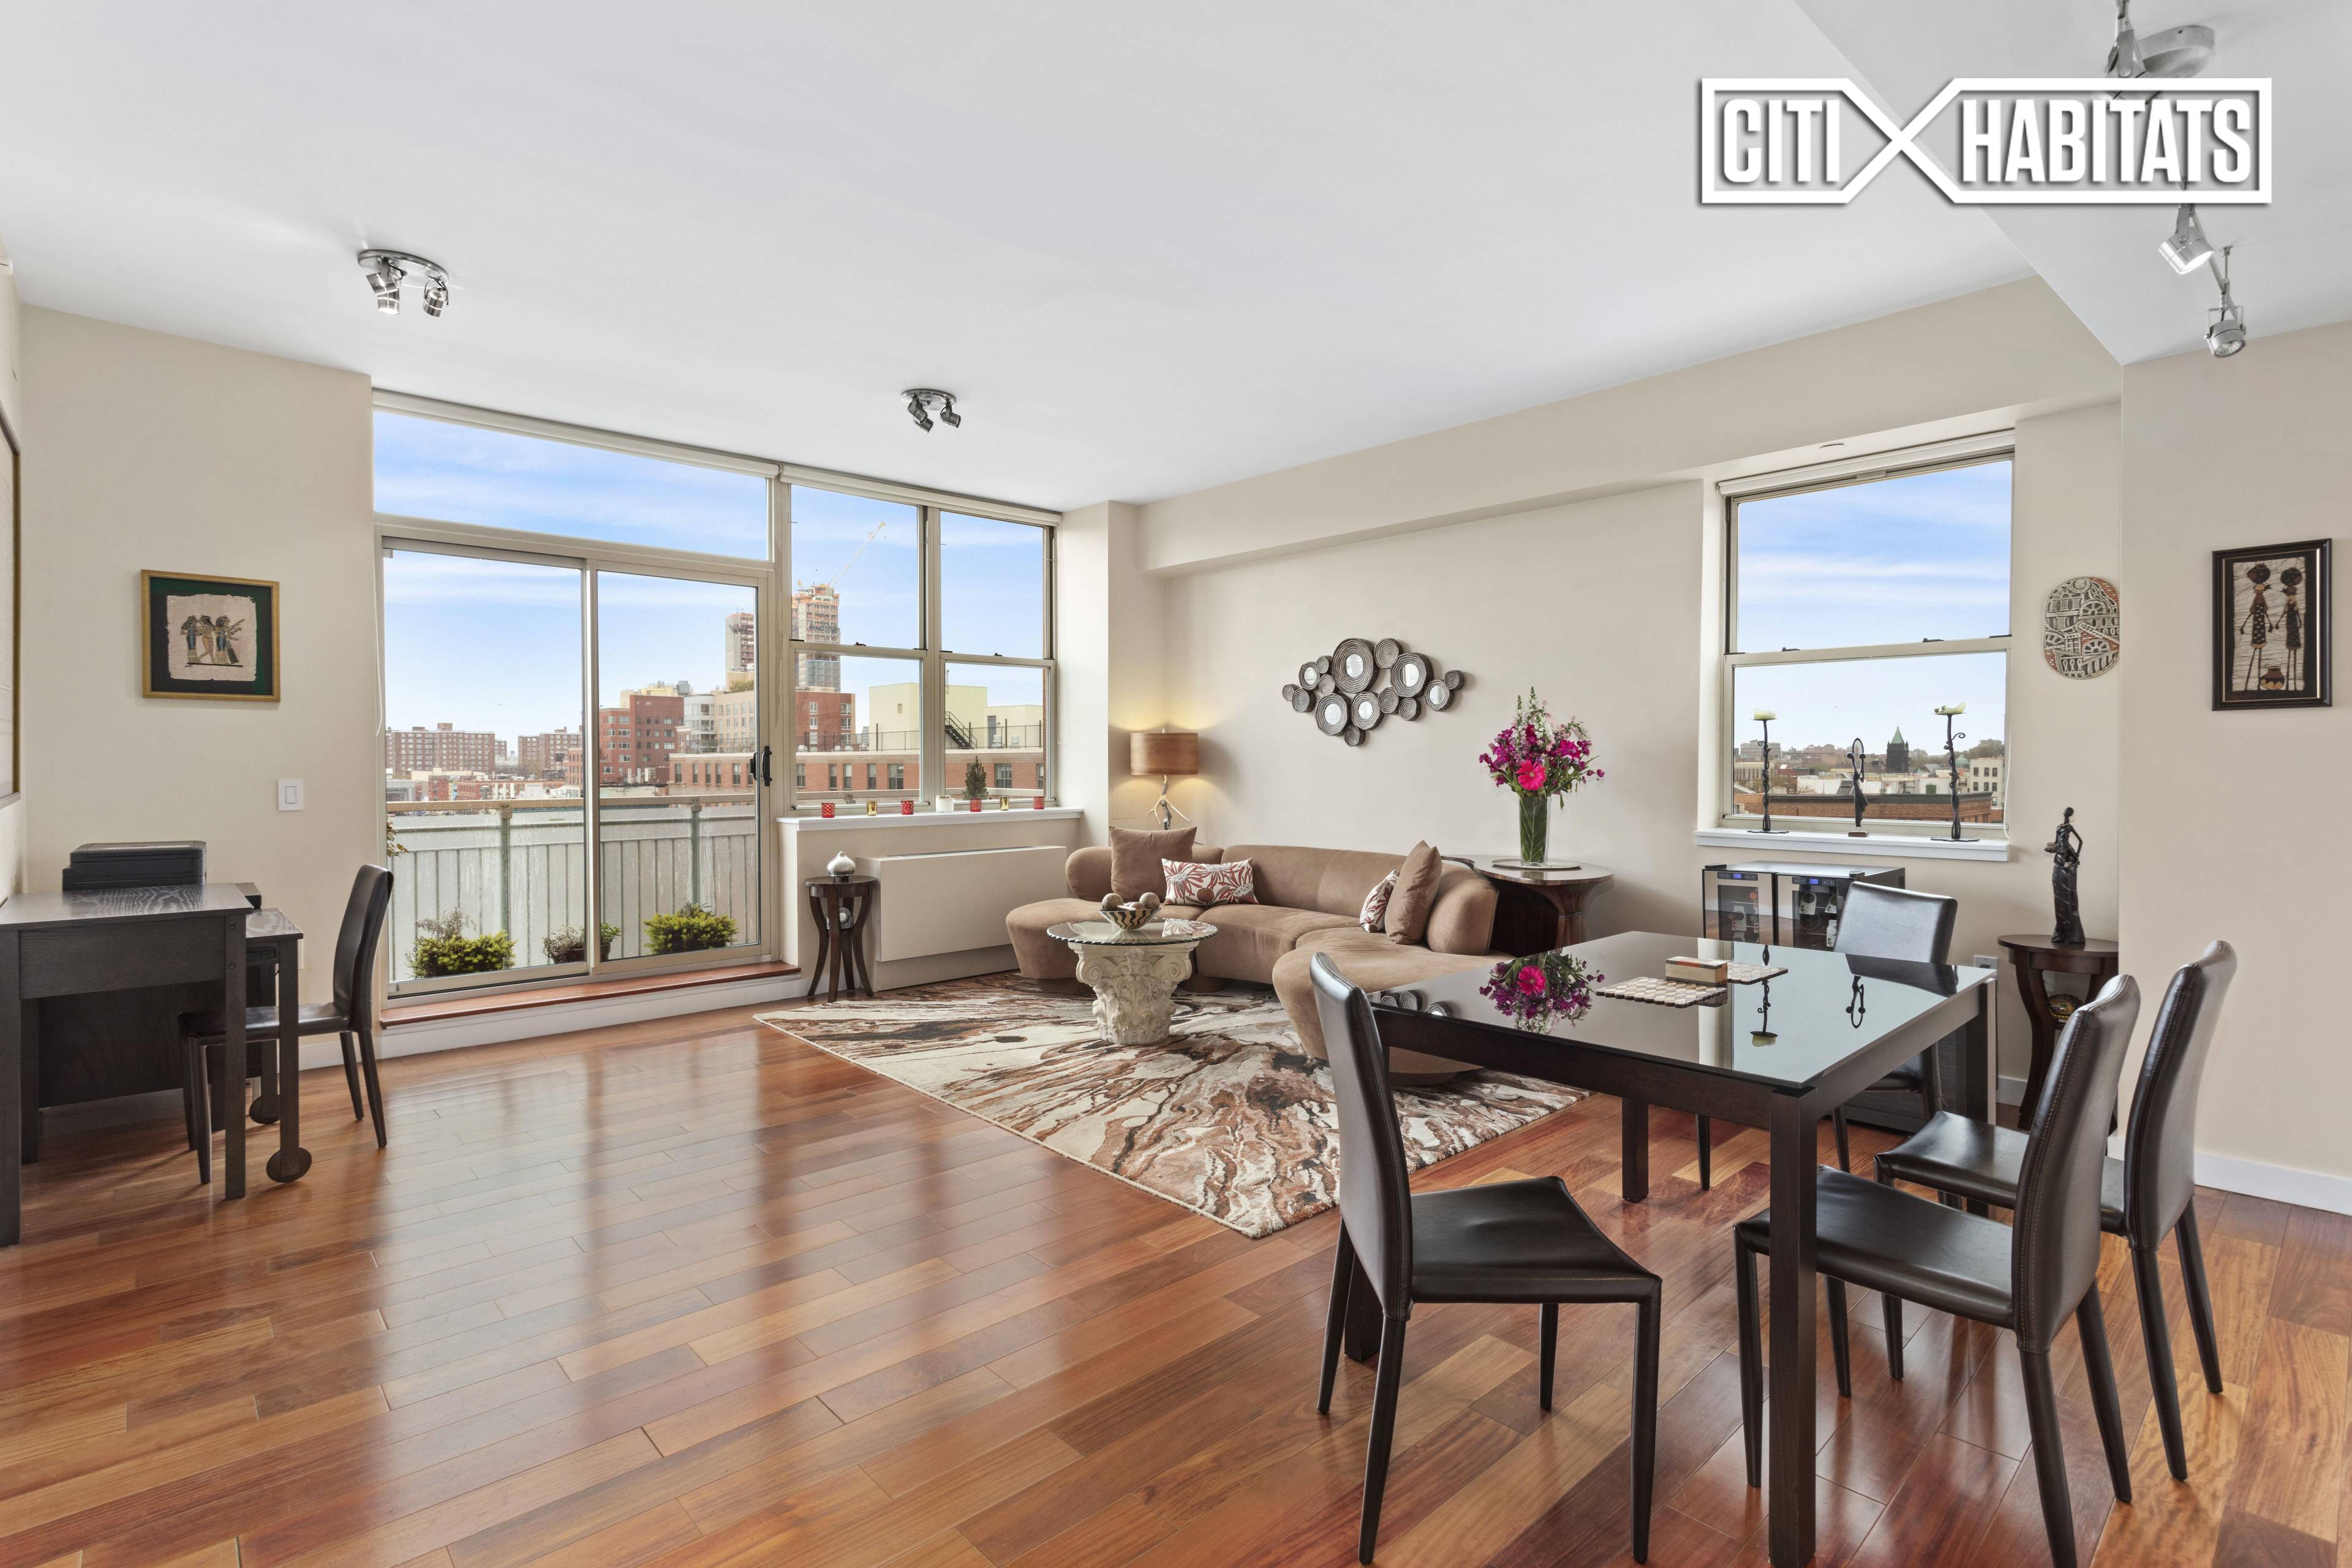 Penthouse 8a, freshly painted a soft white, is a 1410 sf, 3 bedroom, 2 bath home featuring mahogany hard wood floors, 9' ceilings and oversize windows, creating an open, airy ...